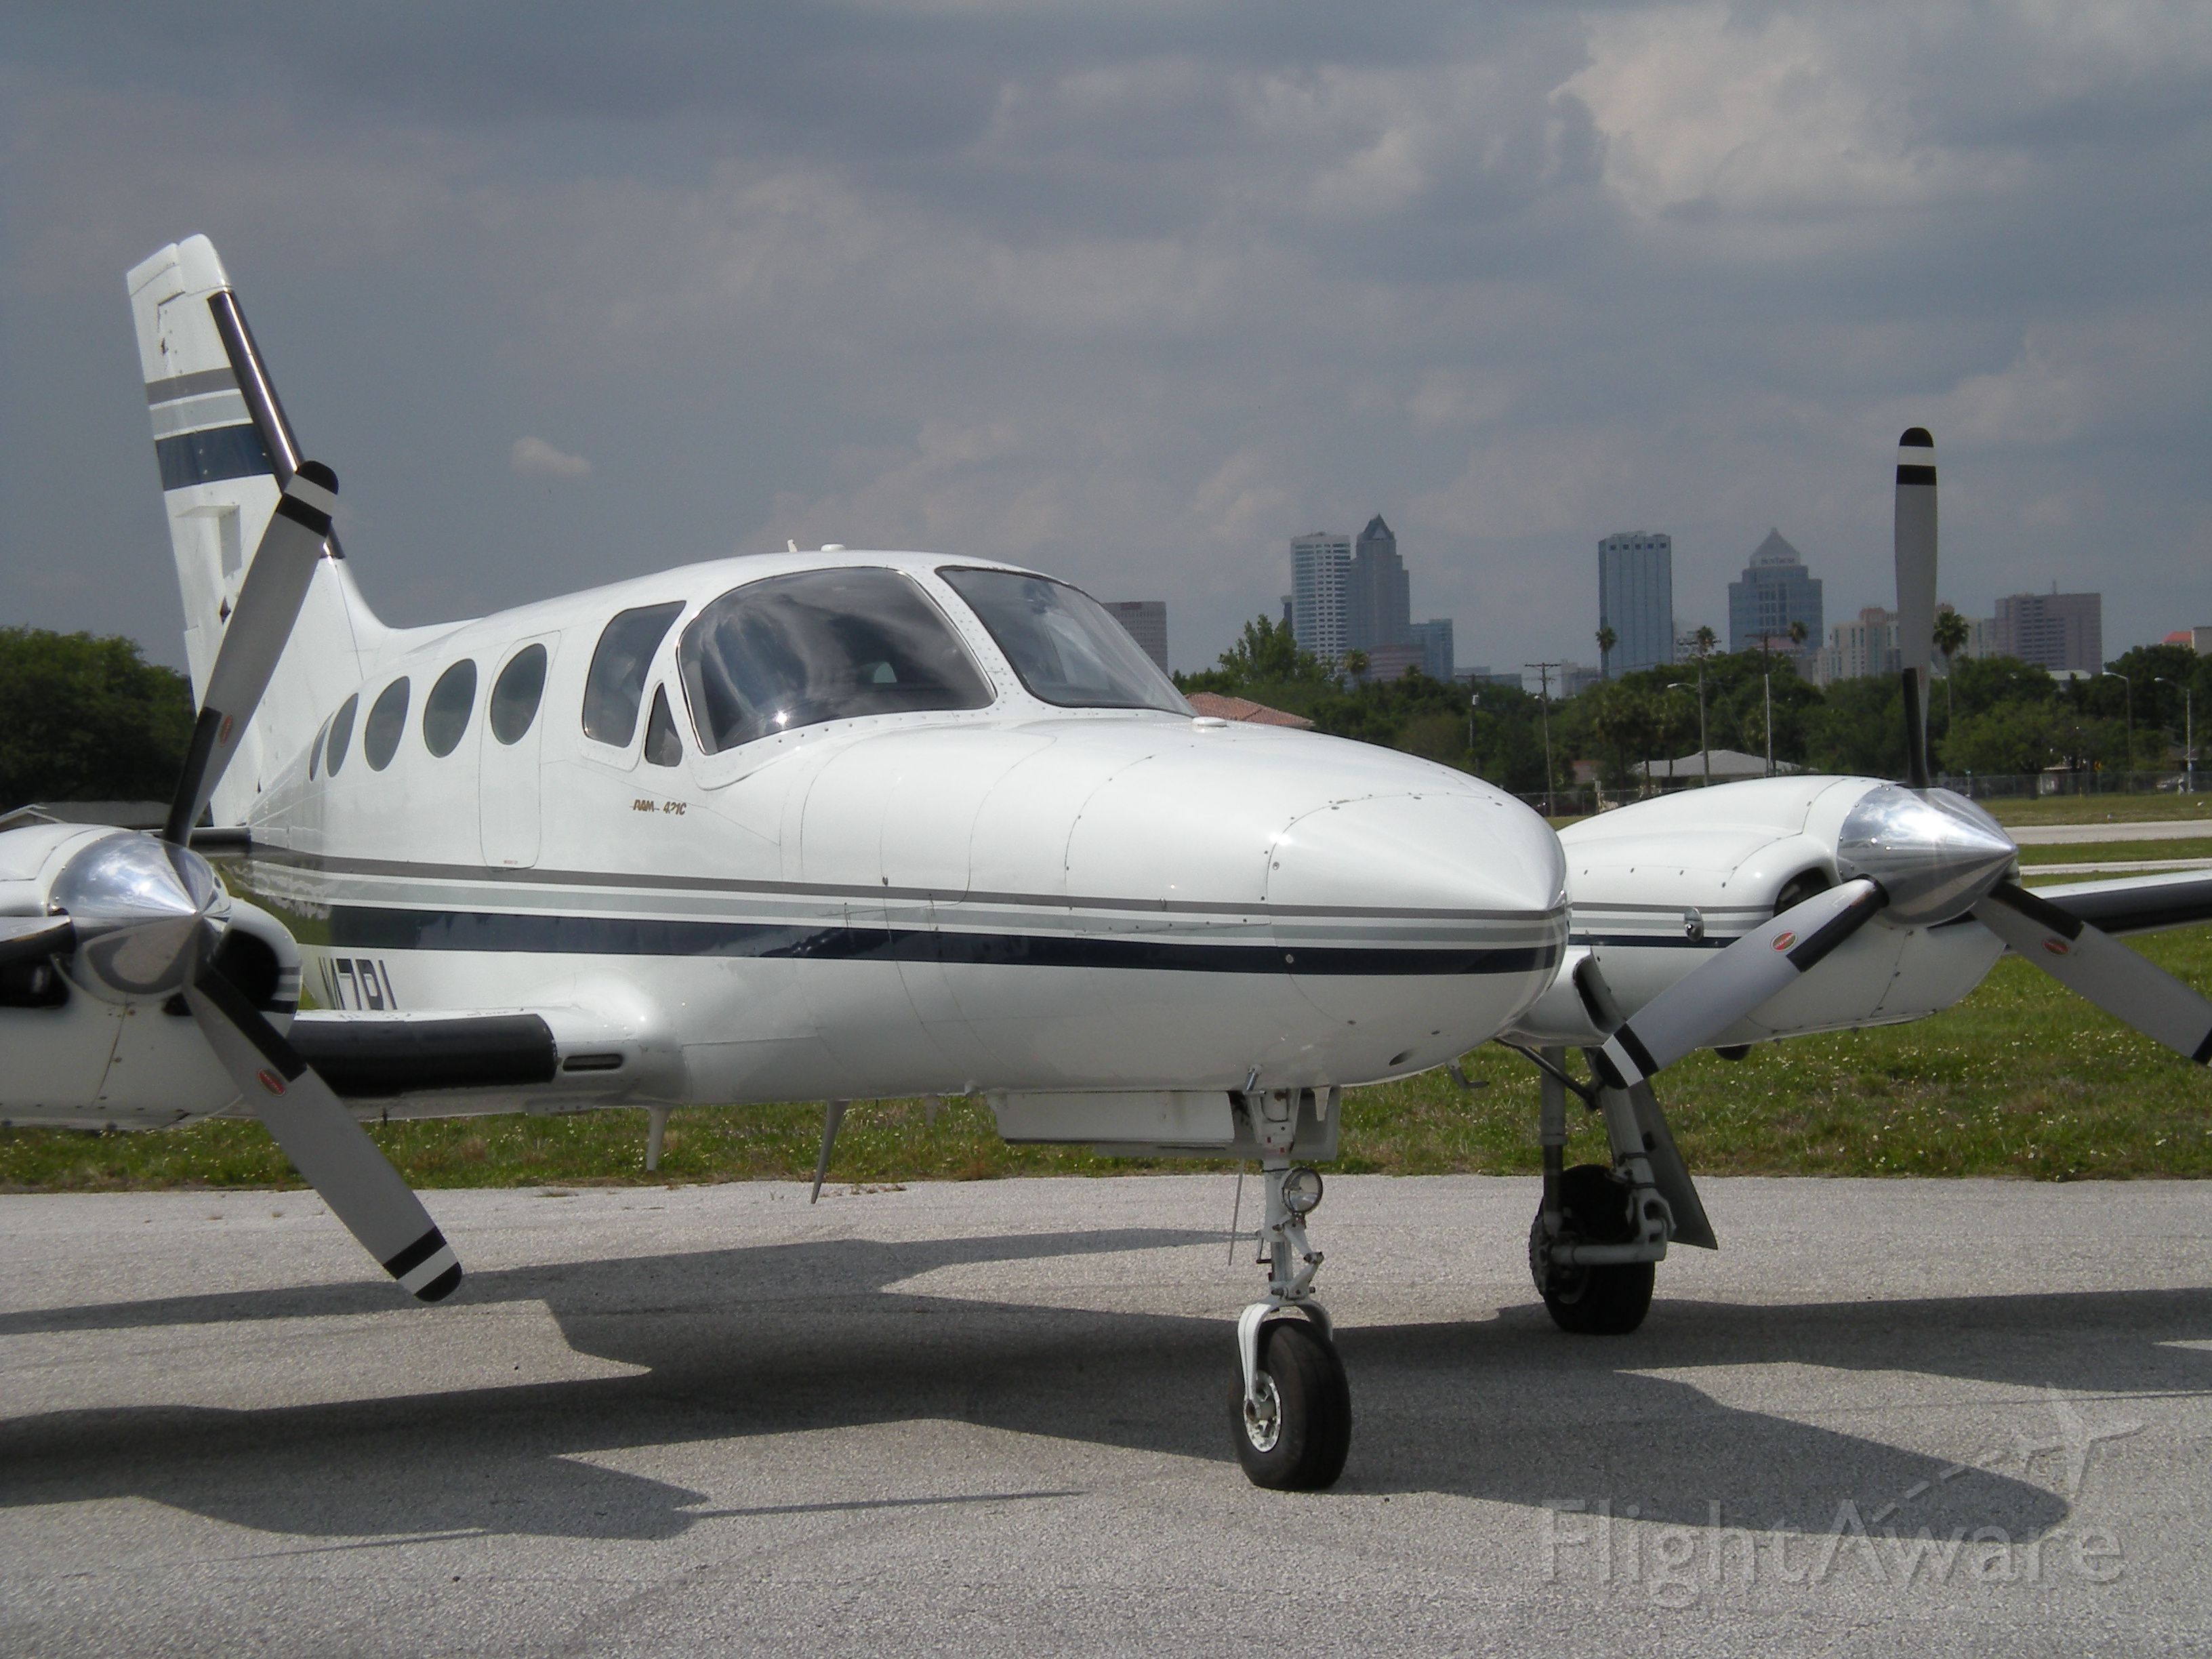 Cessna 421 (N47RL) - At the north end of Peter O Knight airport (KTPF) with downtown Tampa in the background.